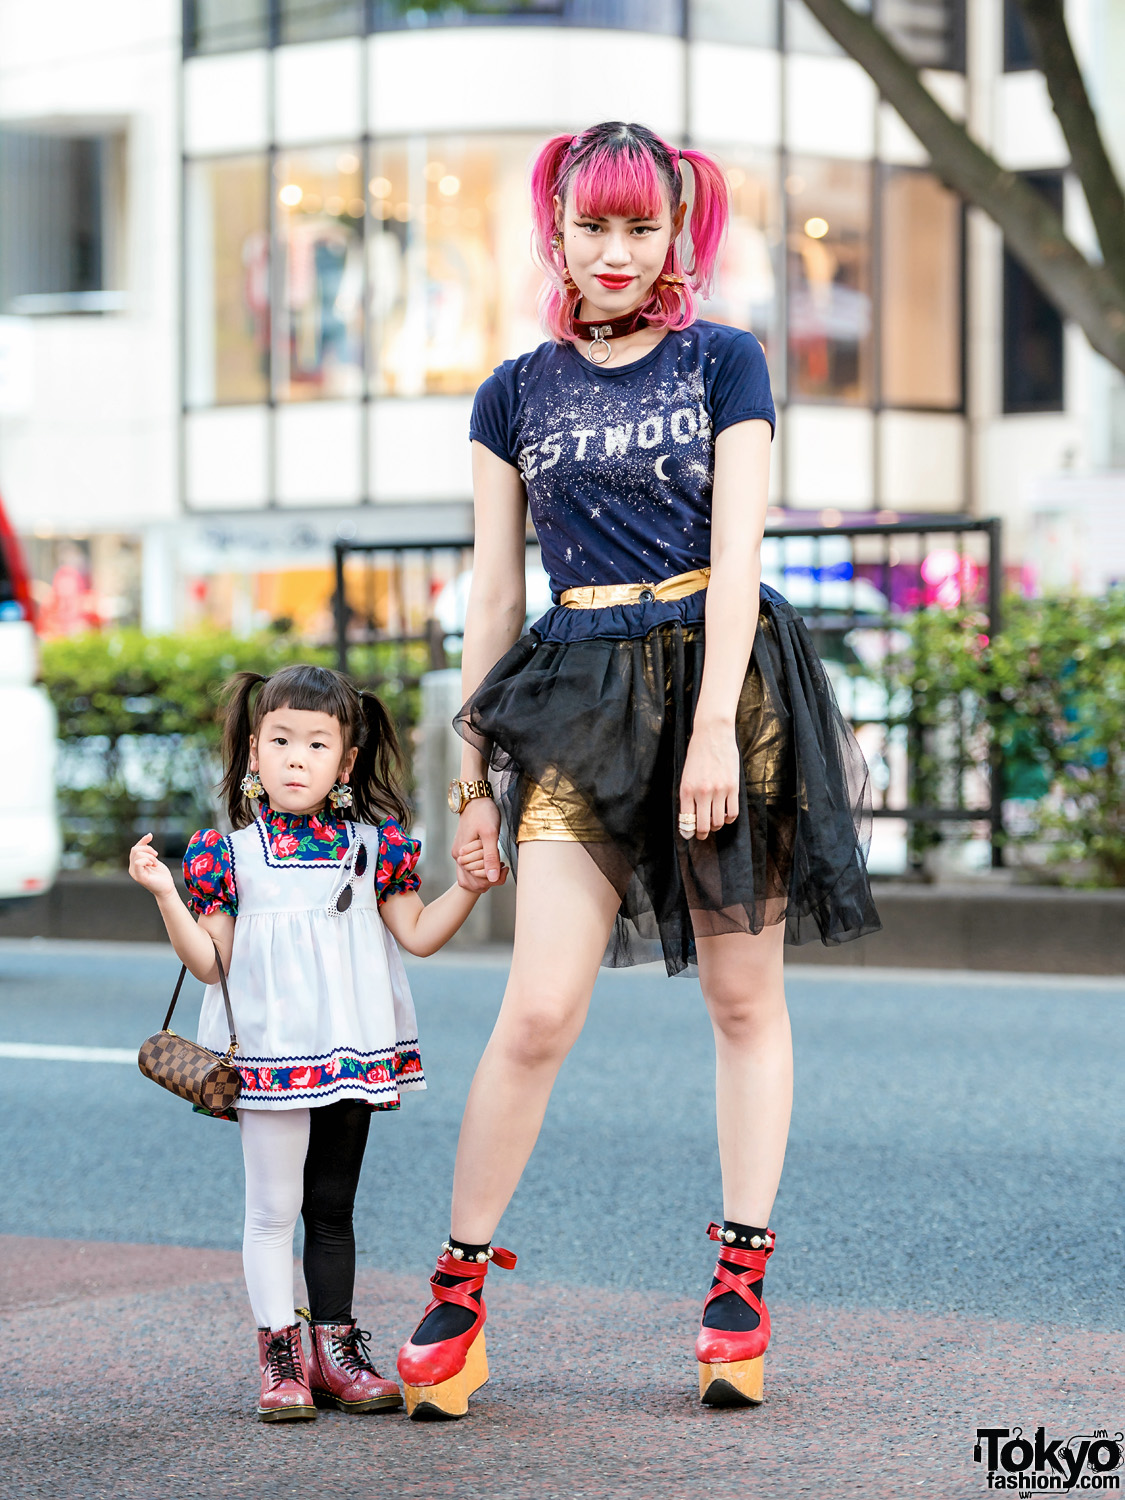 The Ivy Tokyo Mother & Daughter Street Styles w/ Vivienne Westwood 